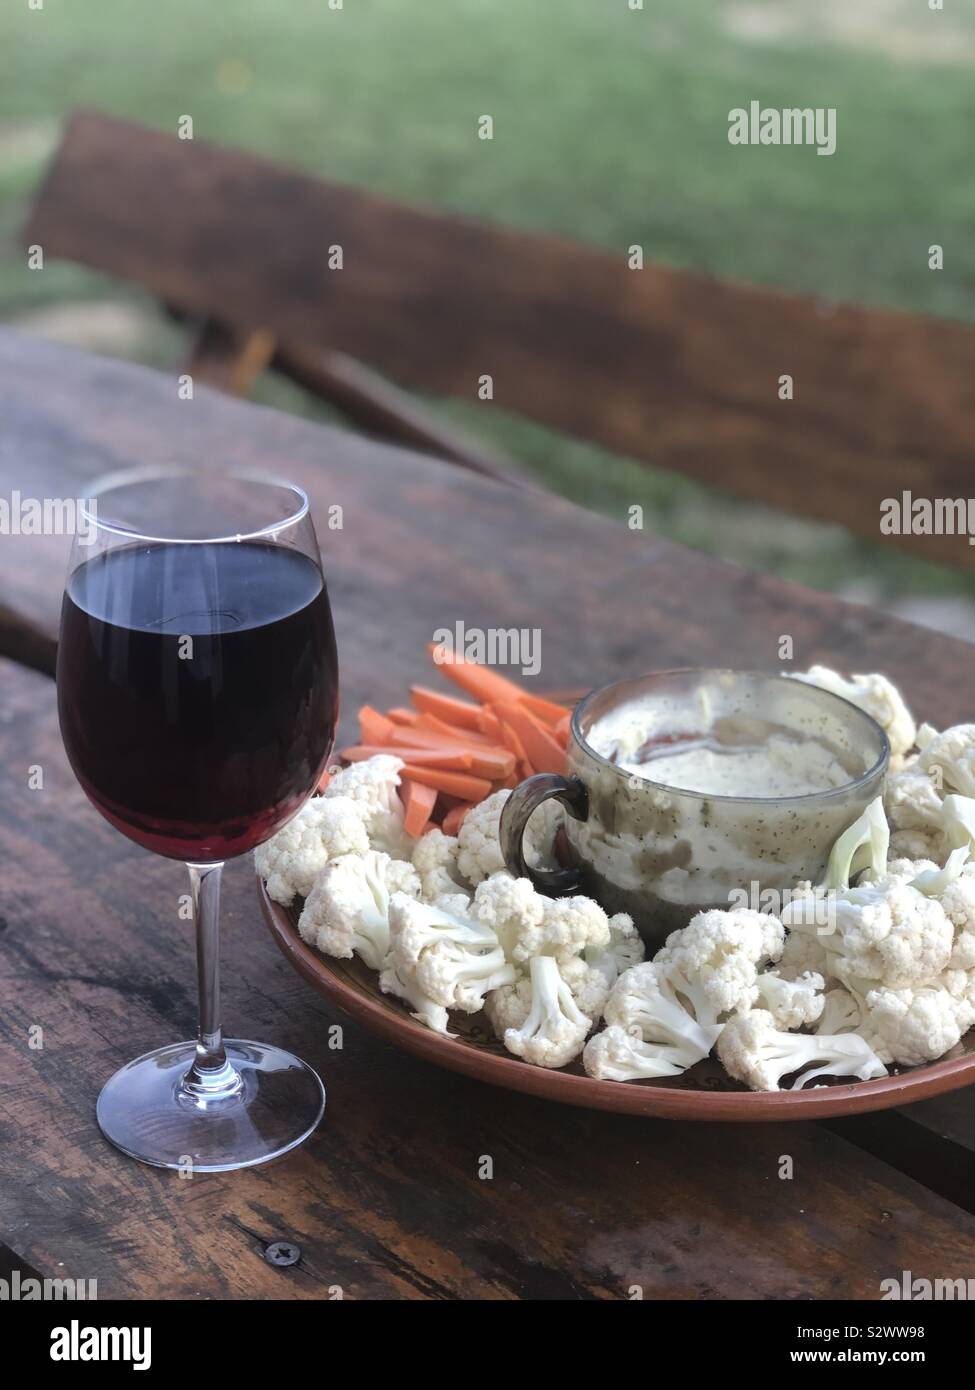 Summer healthy snack with wine and raw veggies Stock Photo